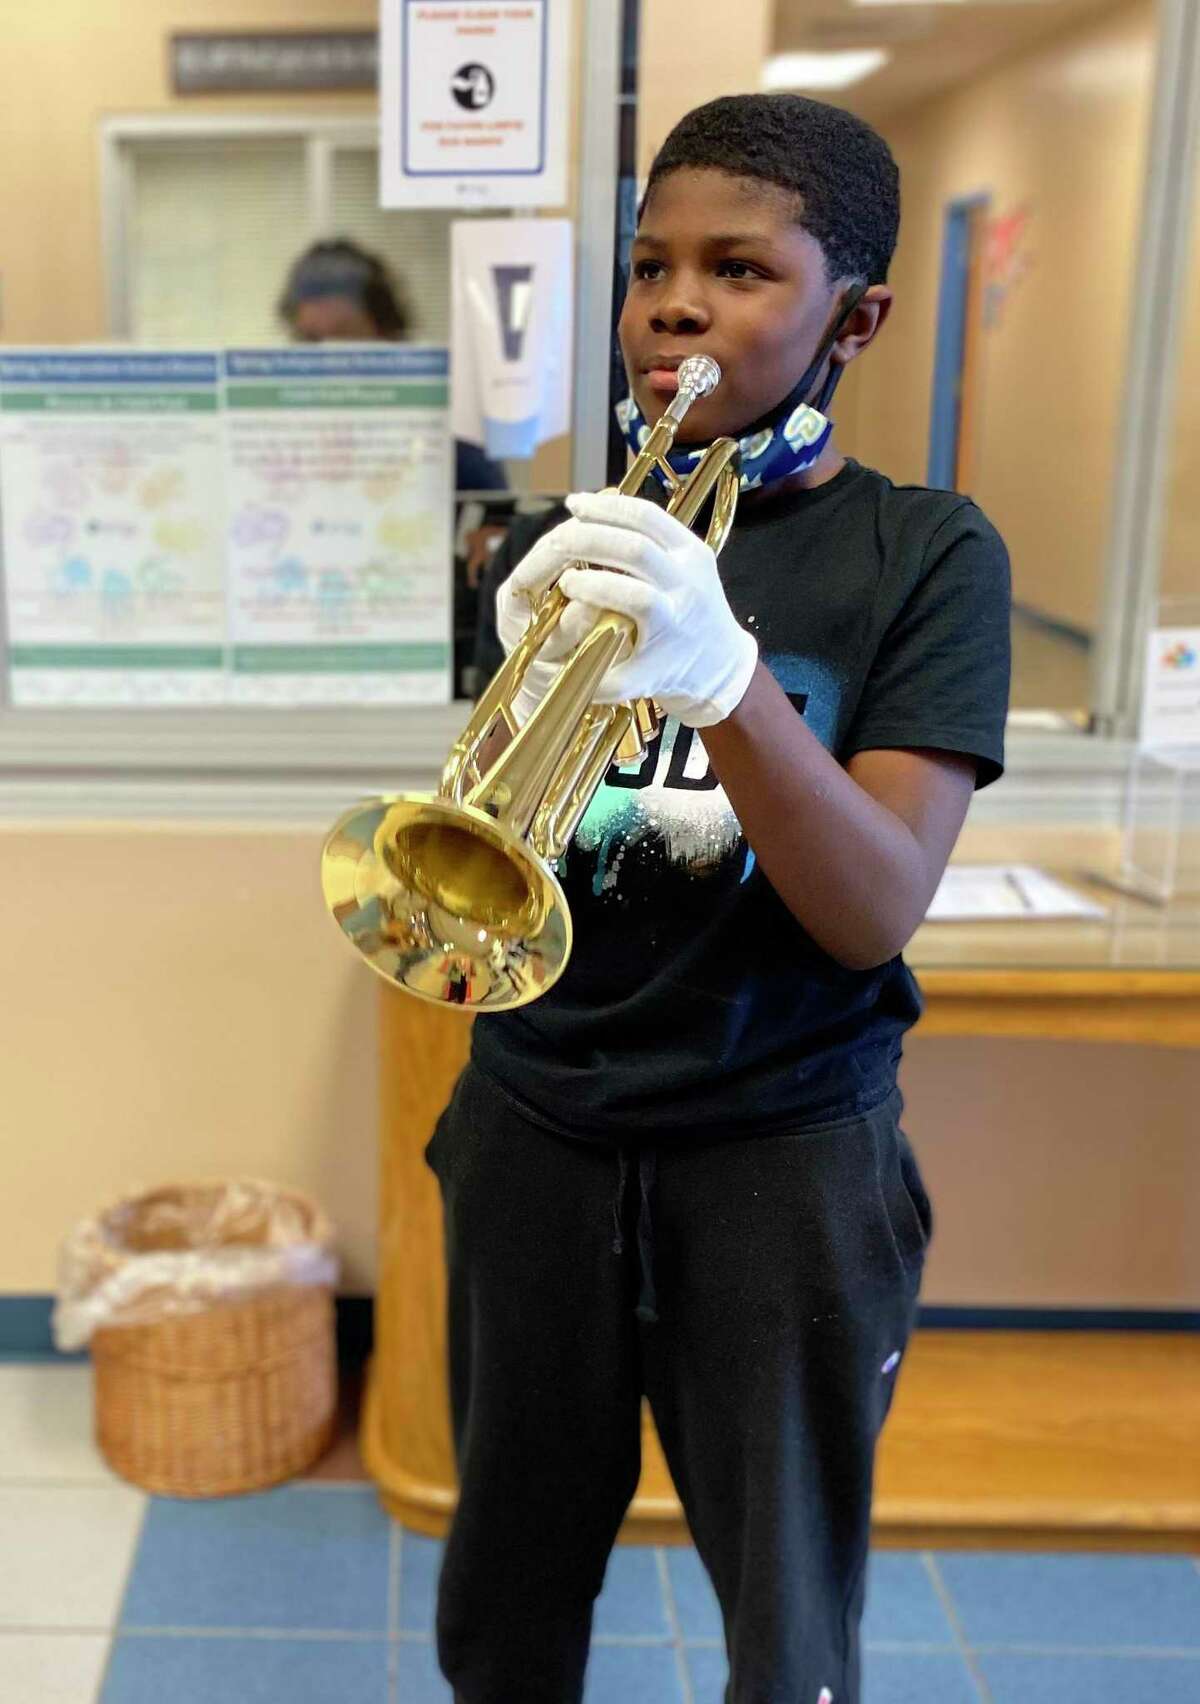 Ponderosa Elementary student Jaron Collins with his new trumpet, given to him by an anonymous faculty member.